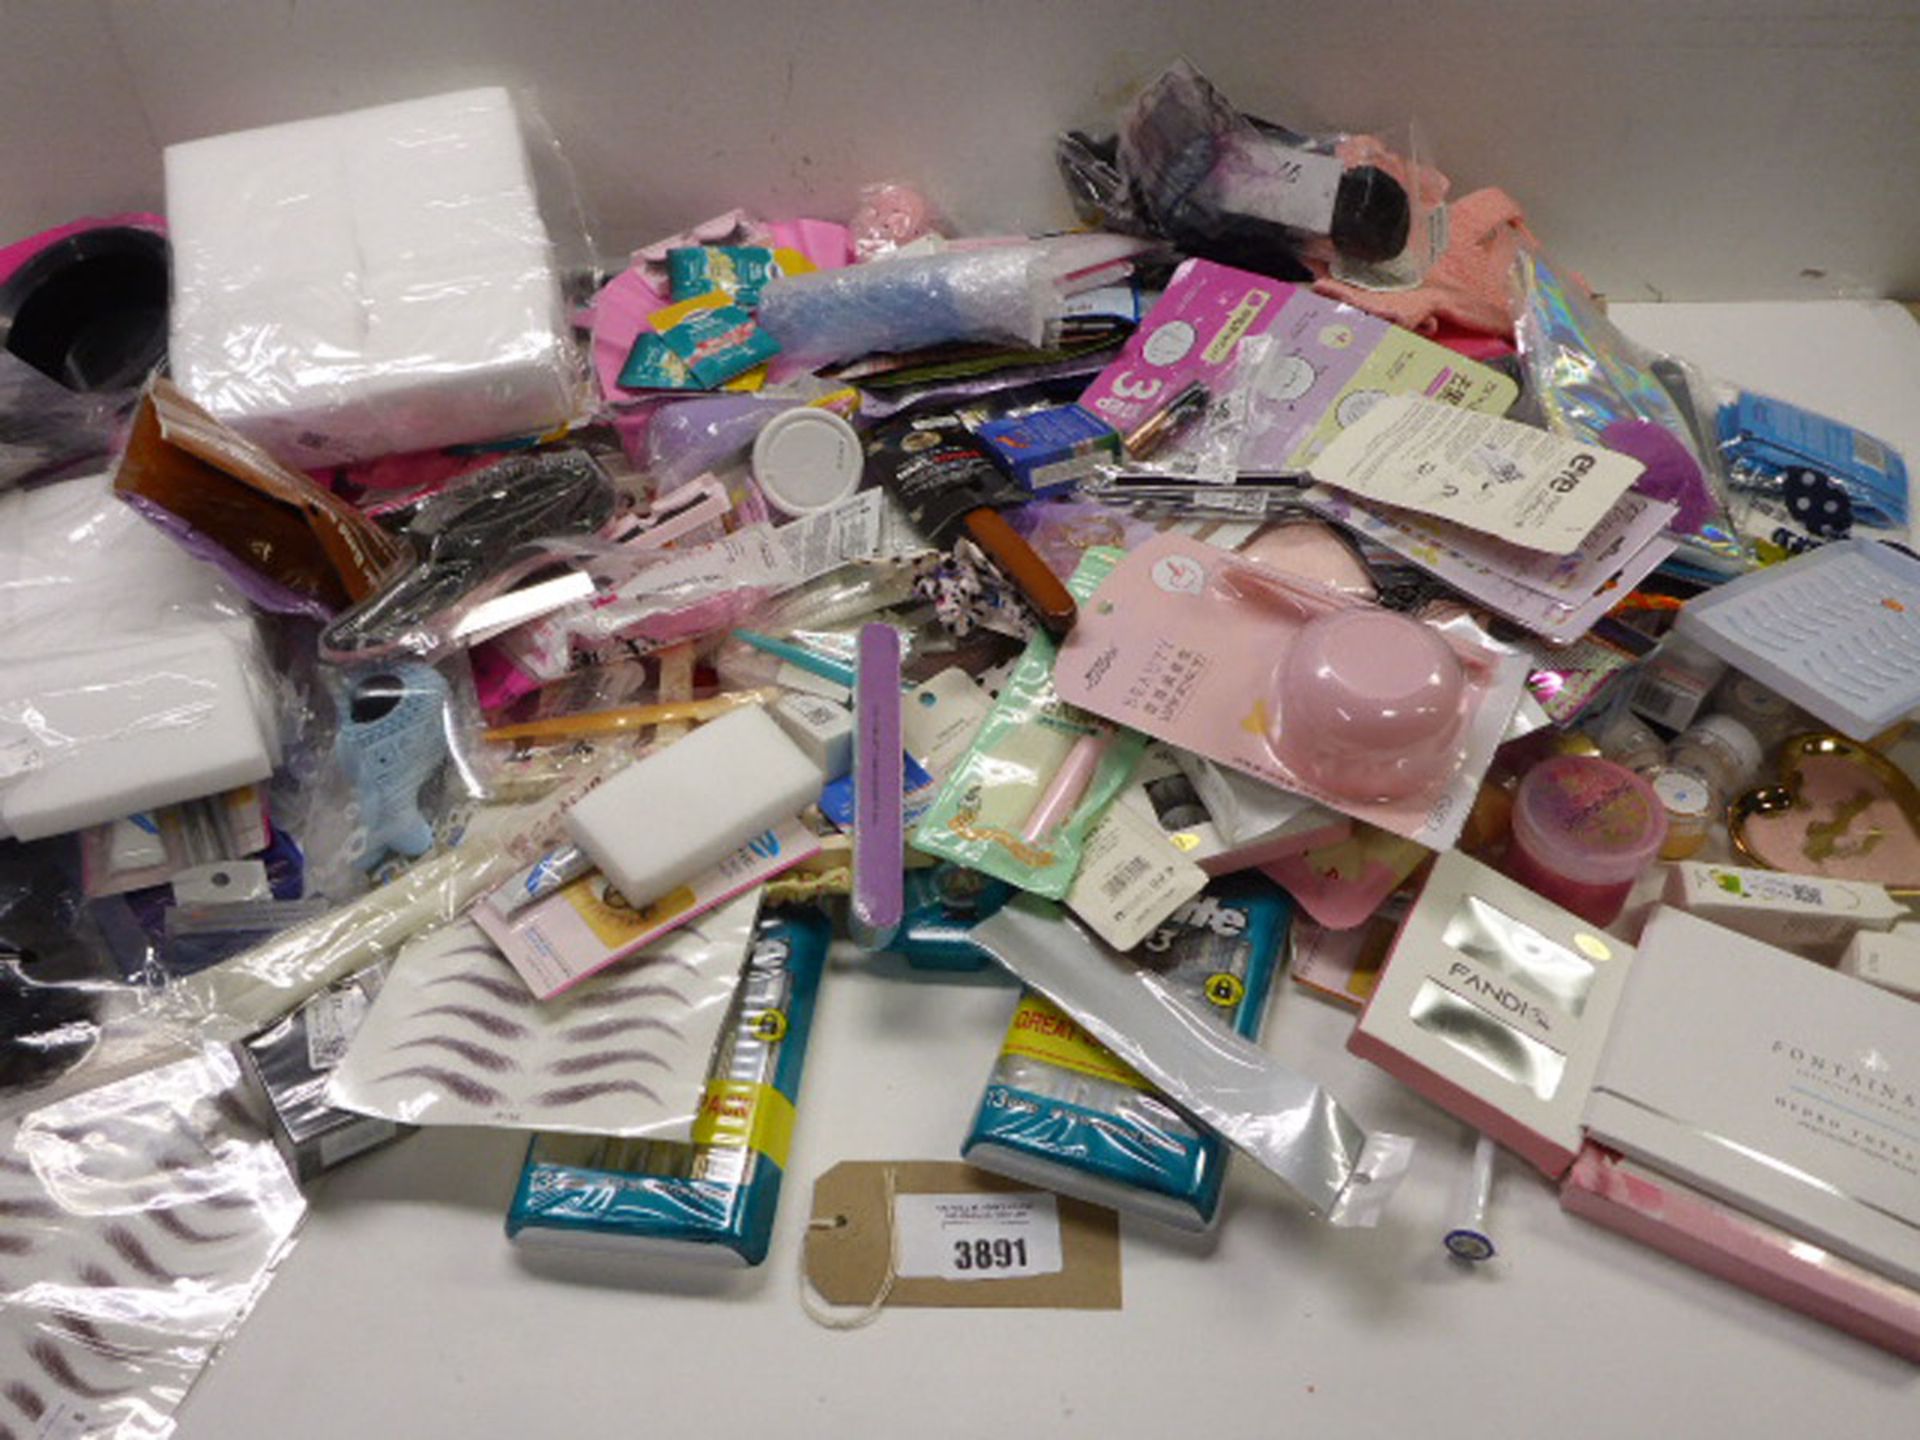 Large bag of assorted beauty products including razors, hair extensions, false eyelashes, hair